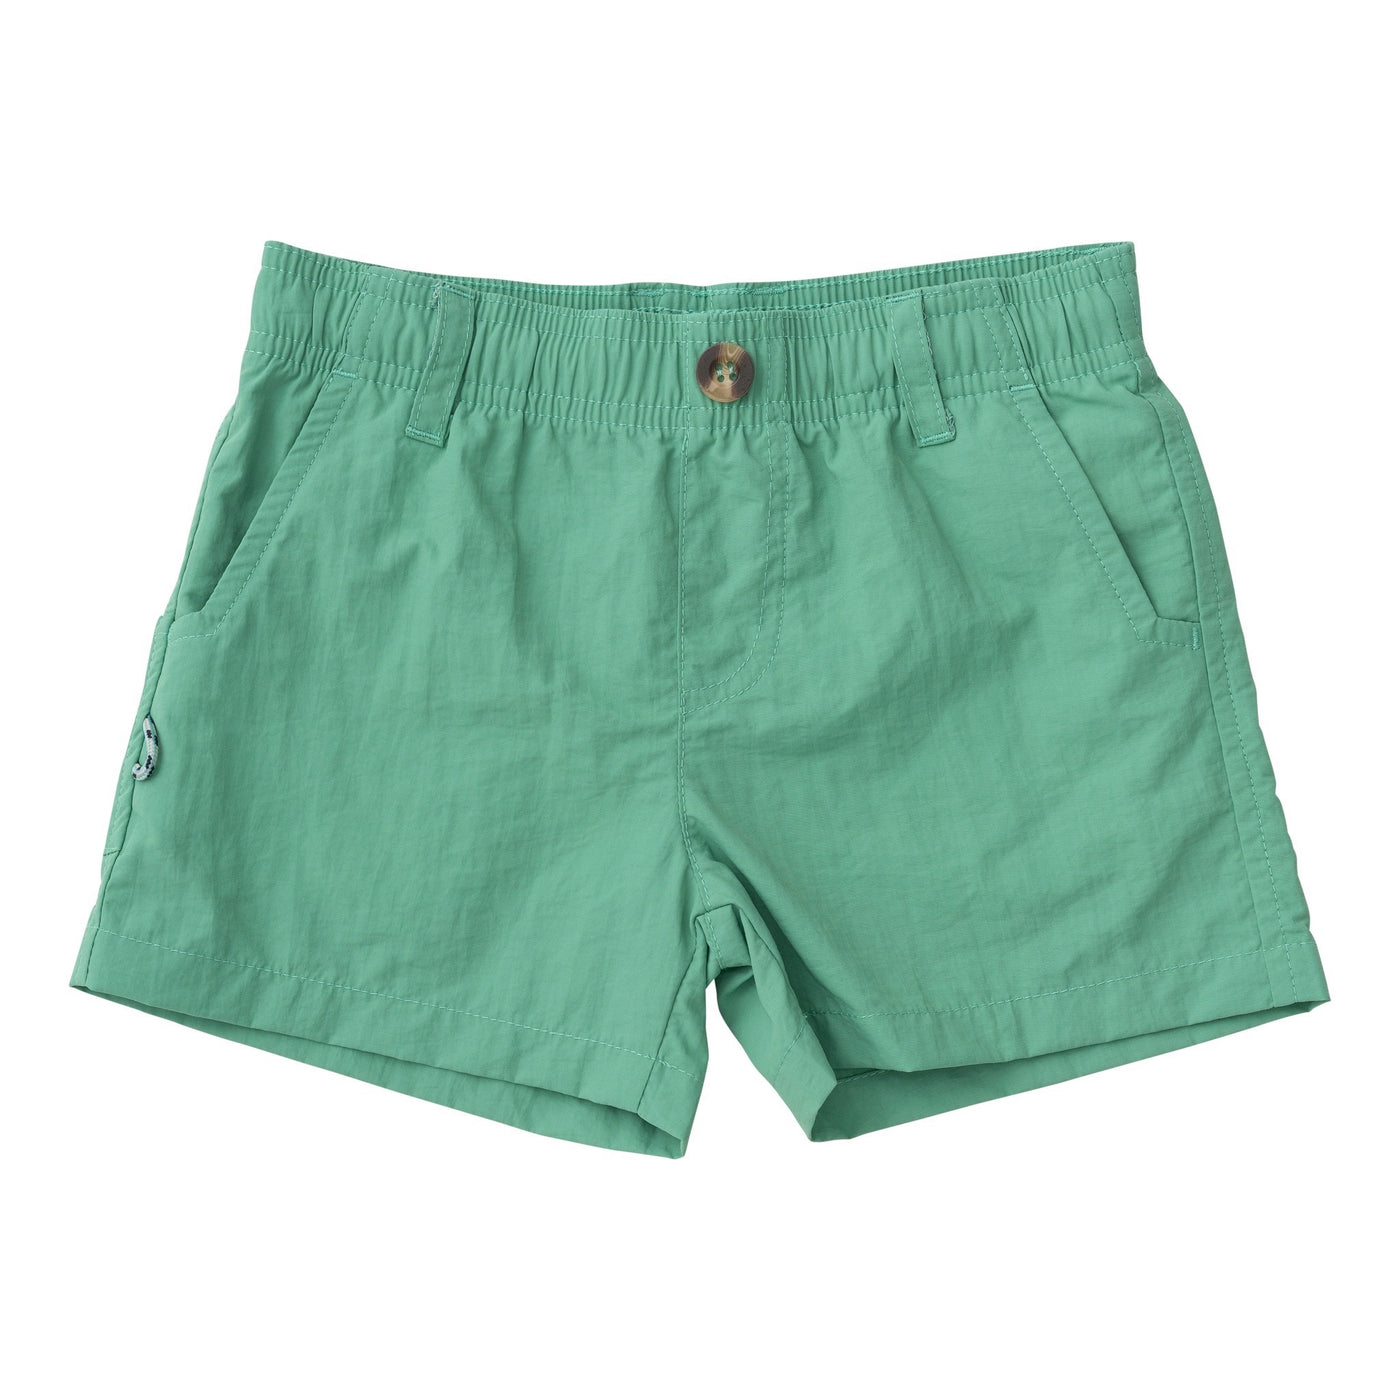 Outrigger Performance Shorts - Green Spruce